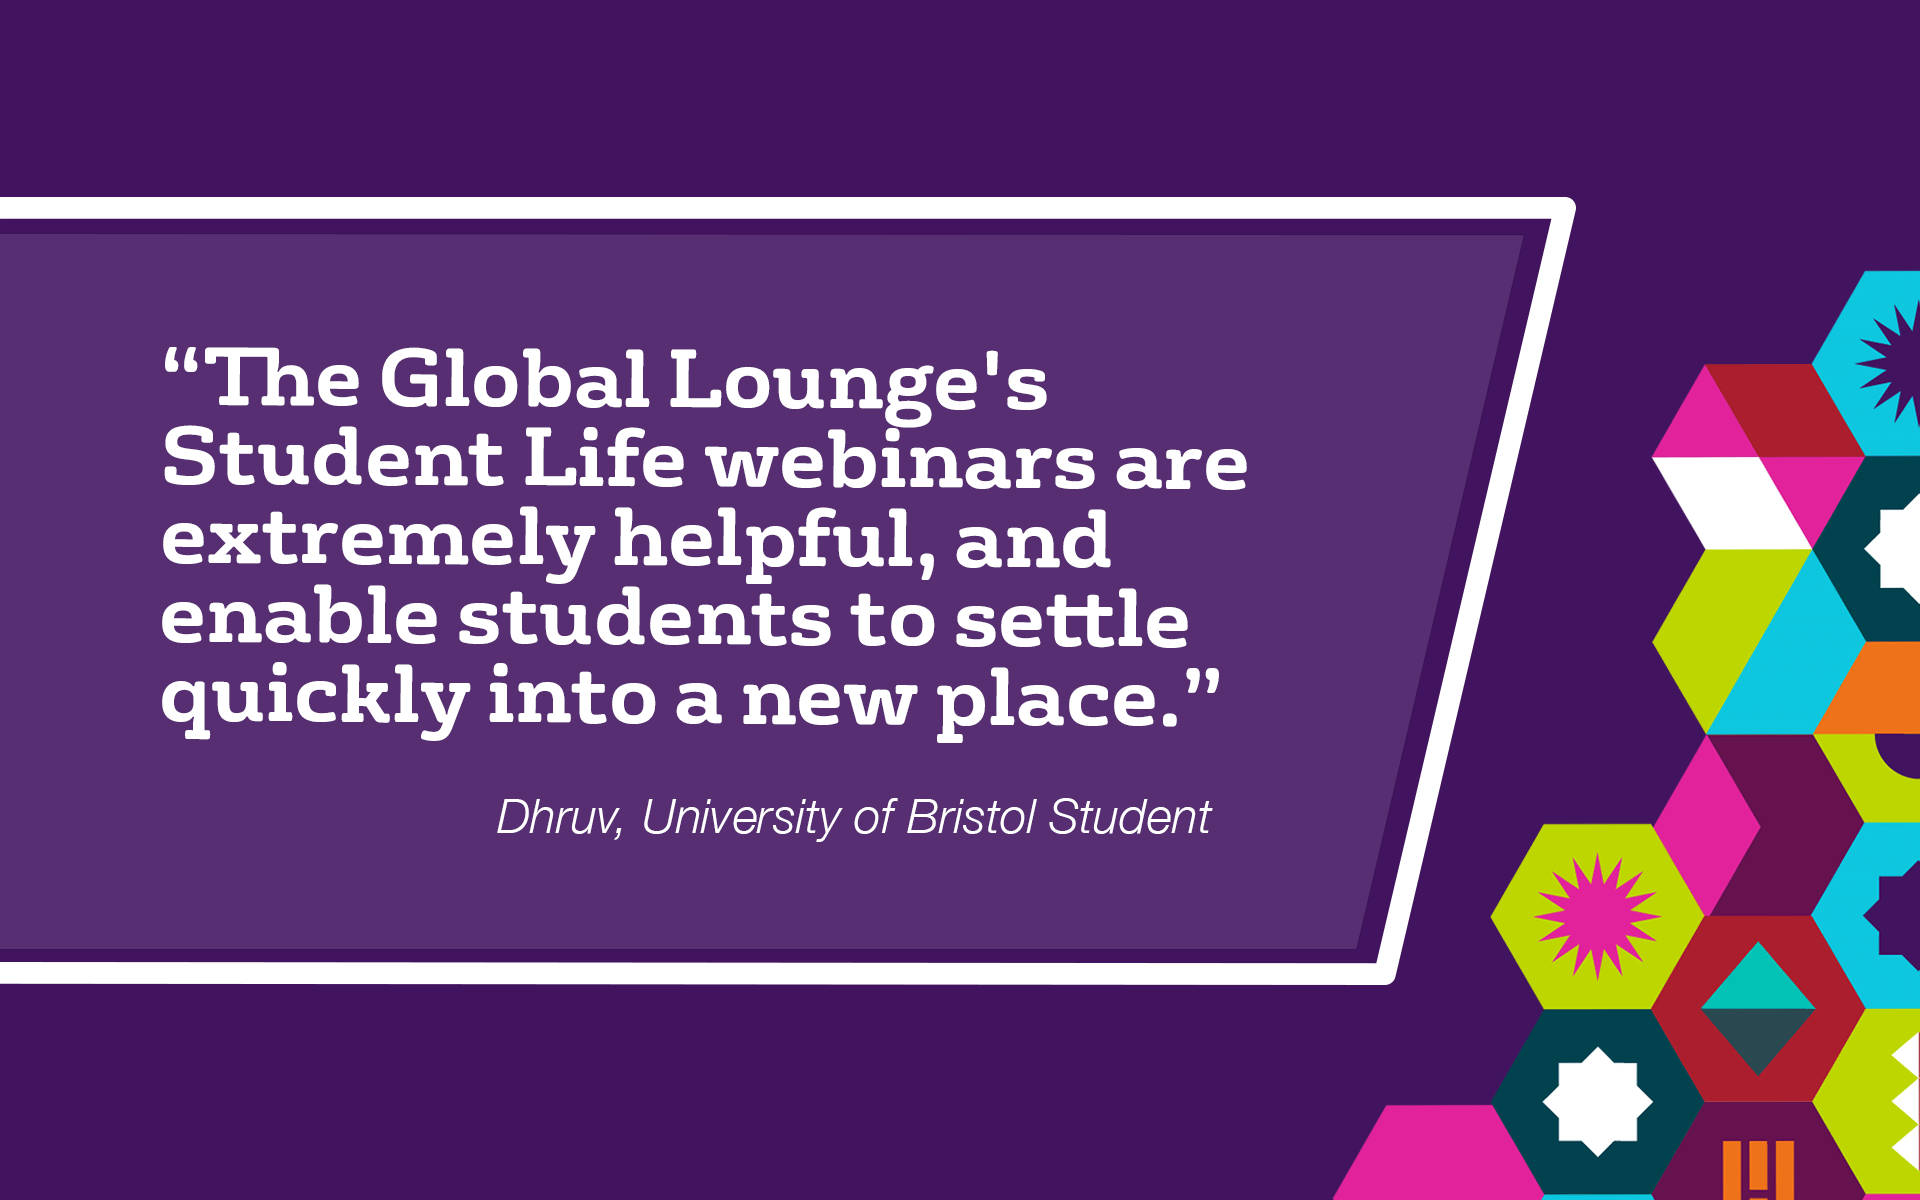 Positive comment on Global Lounge